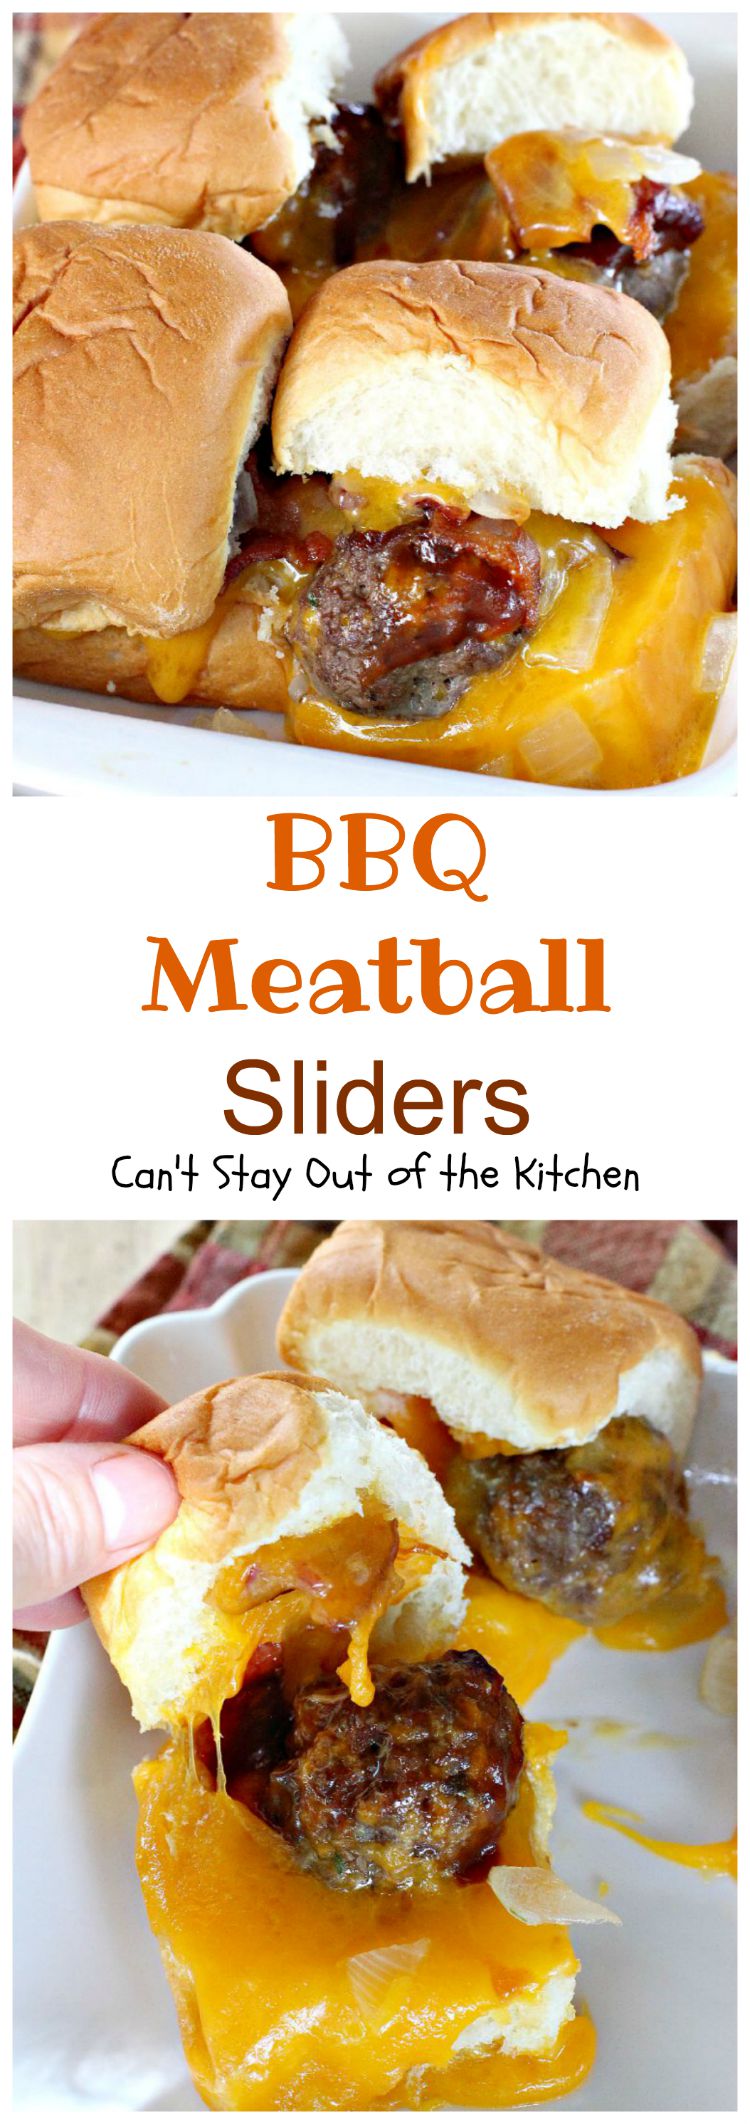 BBQ Meatball Sliders | Can't Stay Out of the Kitchen